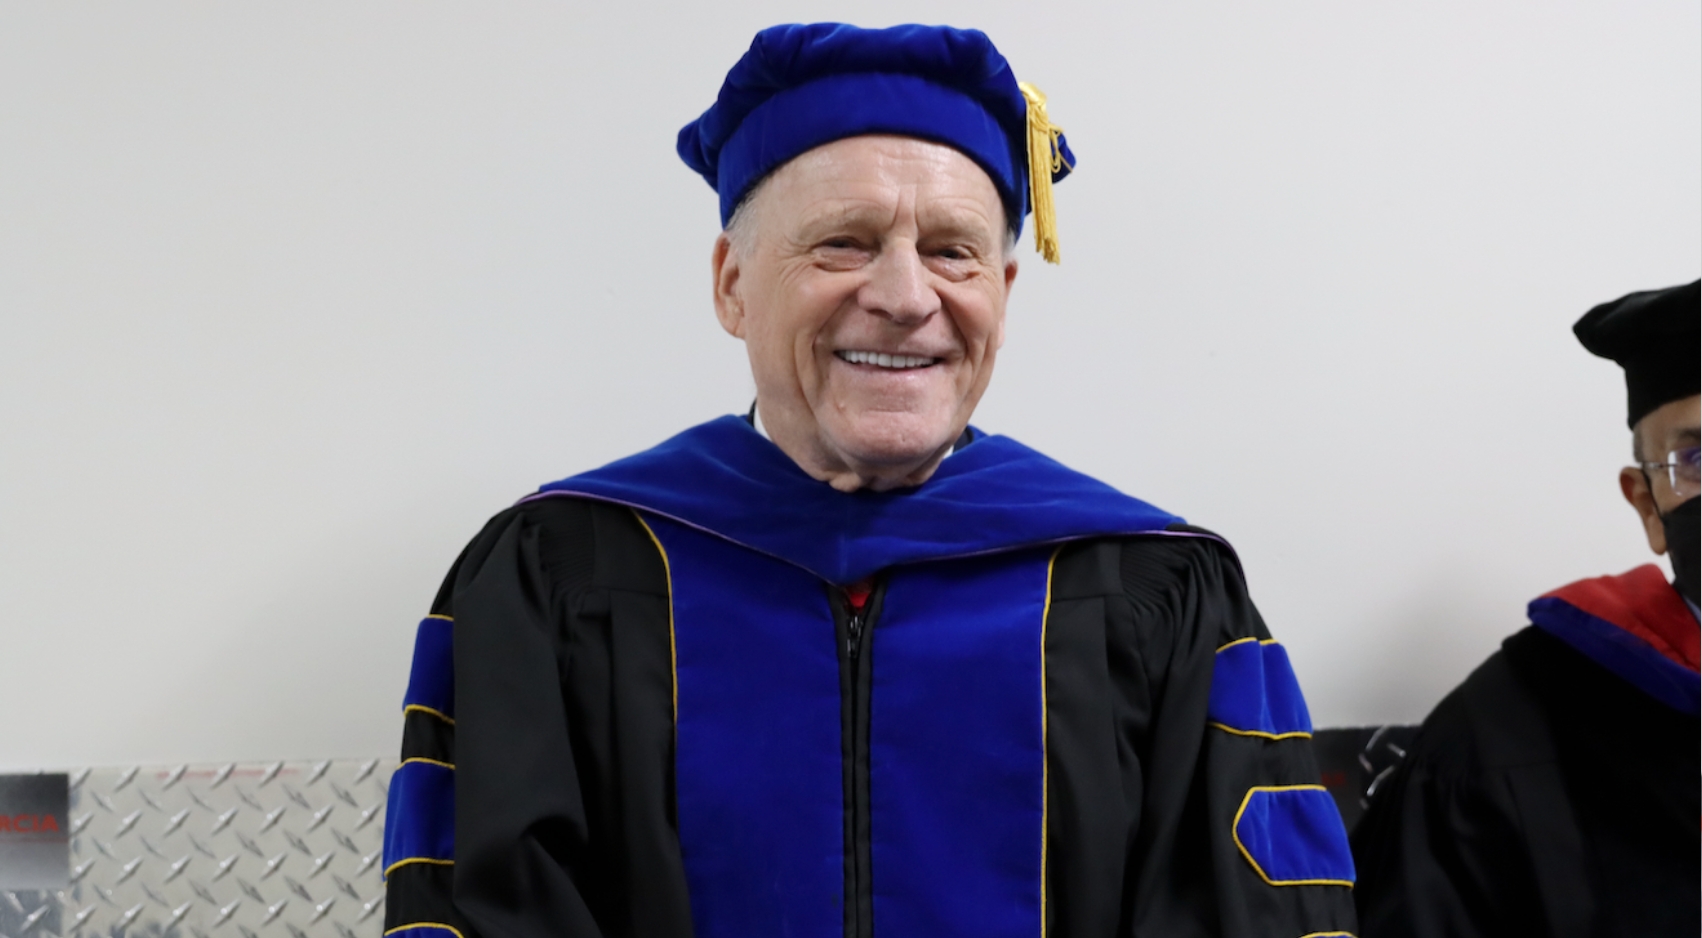 Janusz Supernak retires from SDSU after years as an engineering professor, department chair, and a passionate mentor and educator.